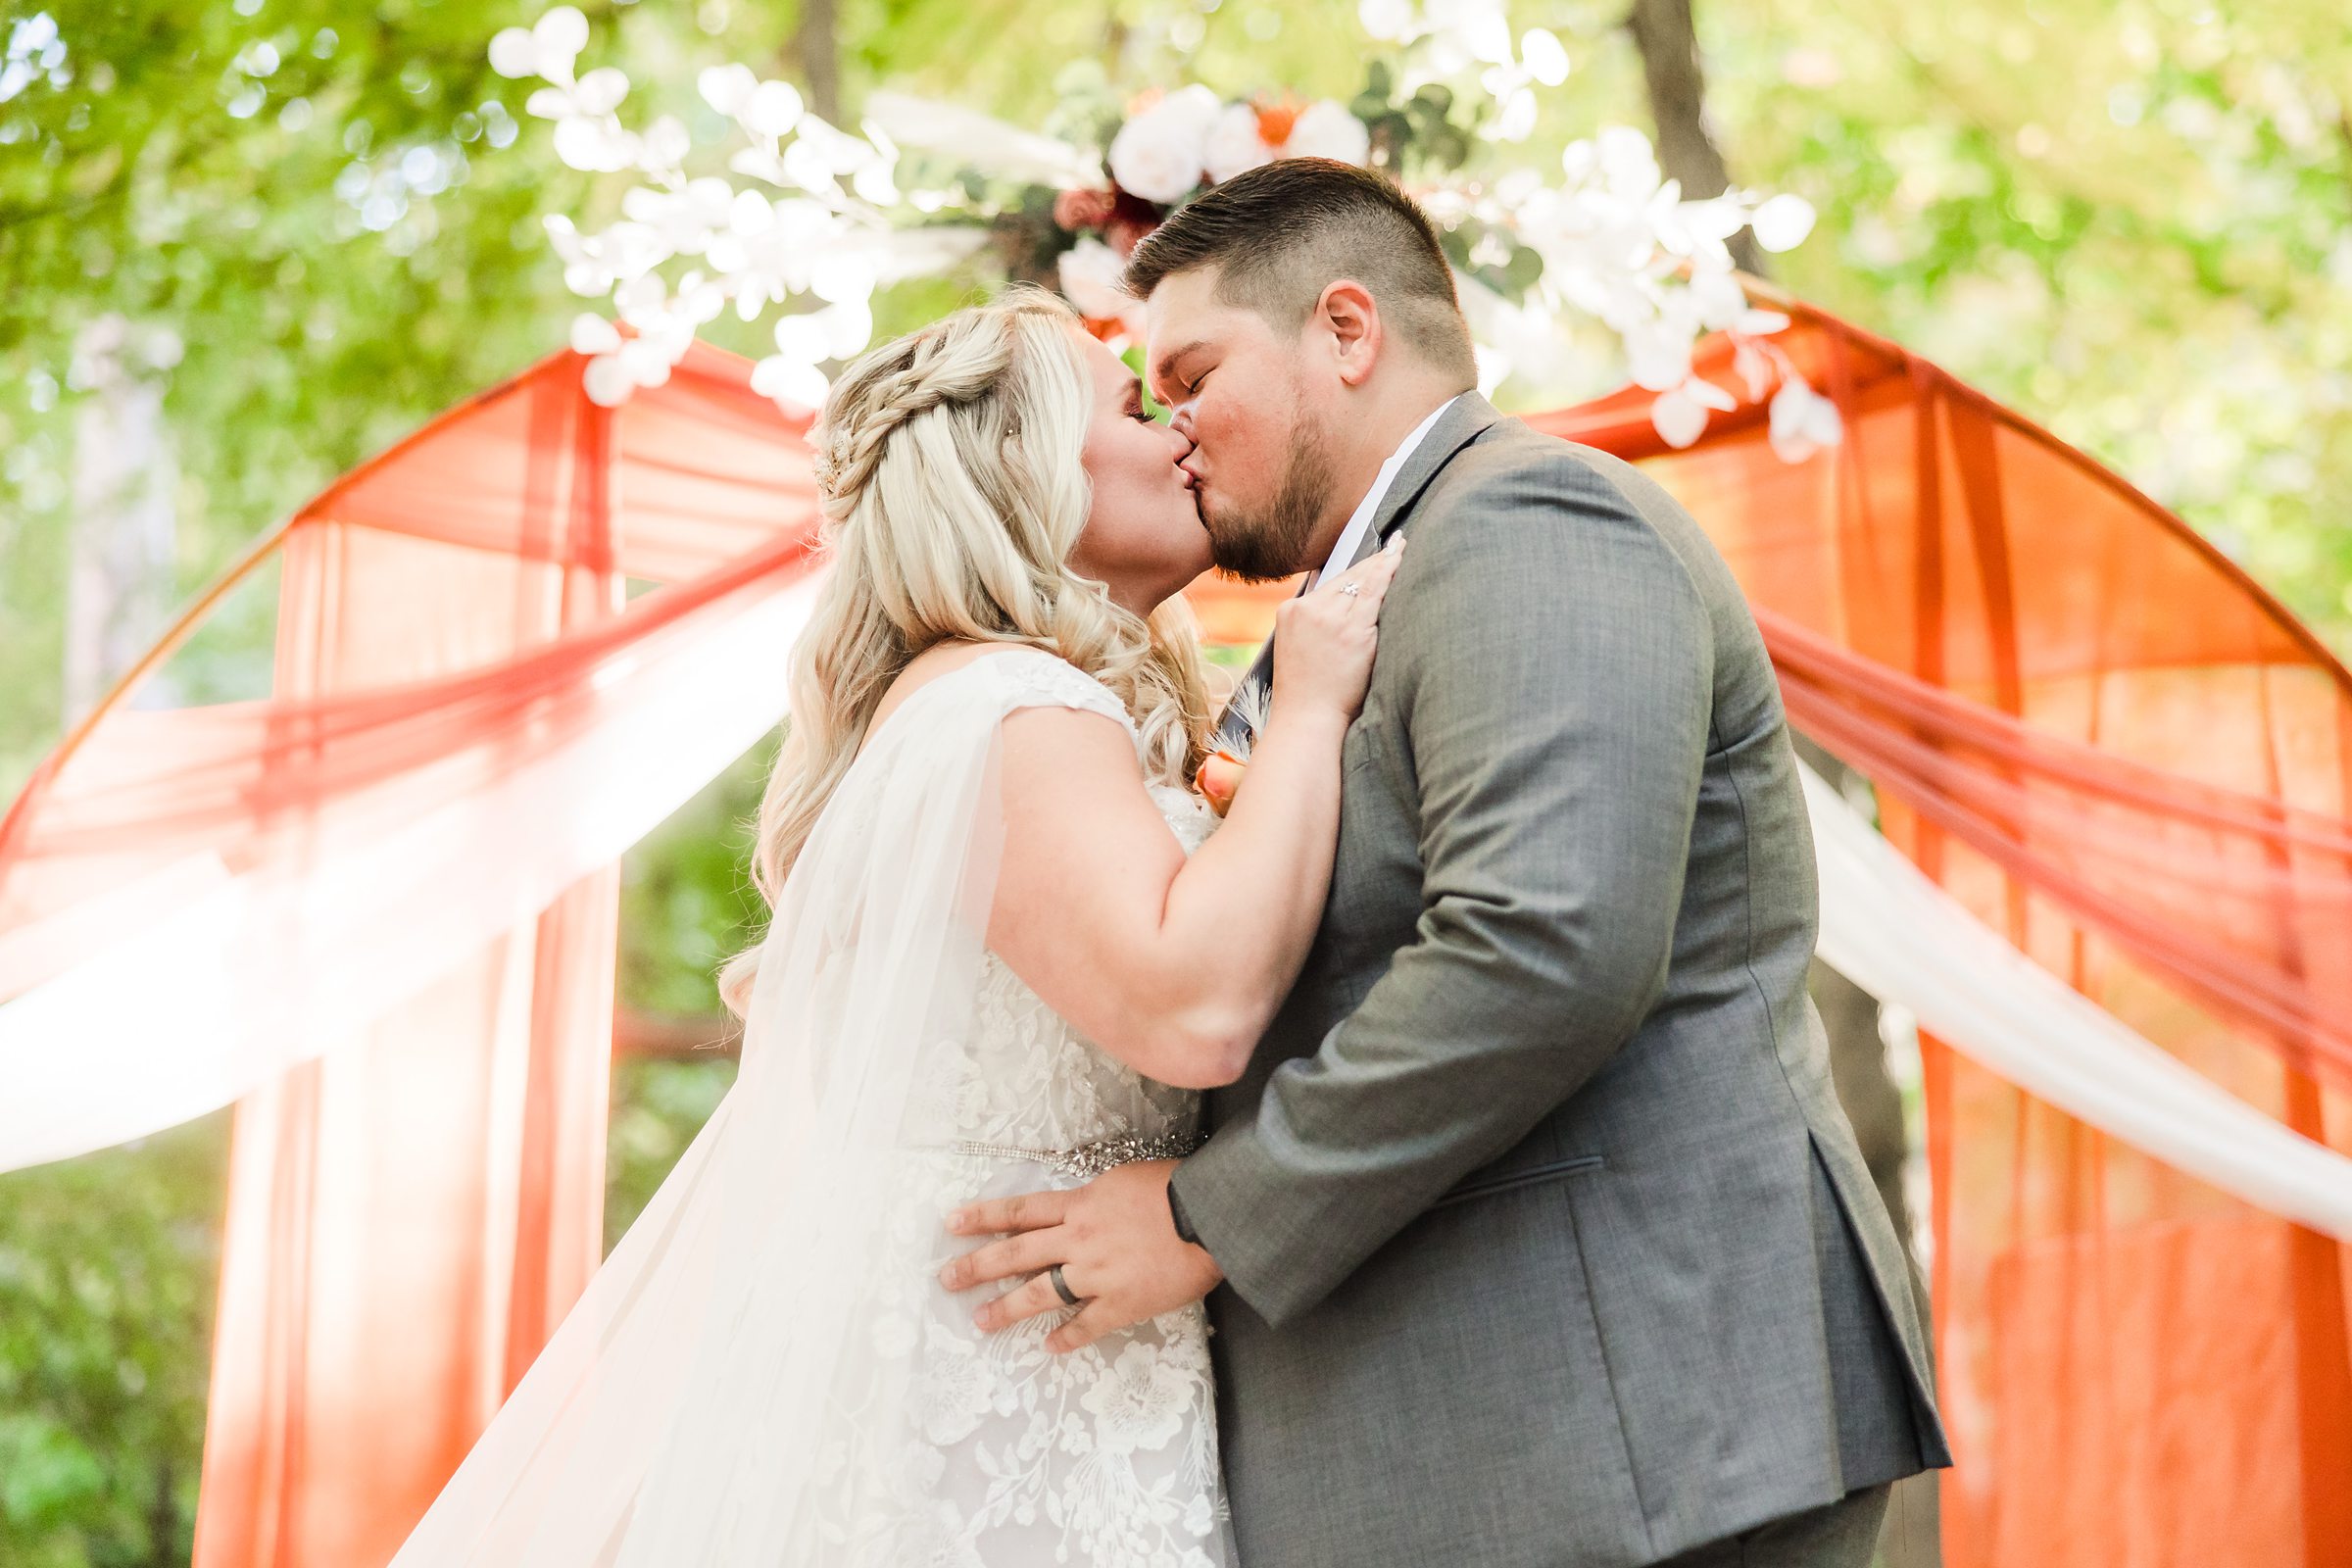 Bride and Groom share their first kiss during a wedding ceremony at Funks Grove in Mclean, Illinois.